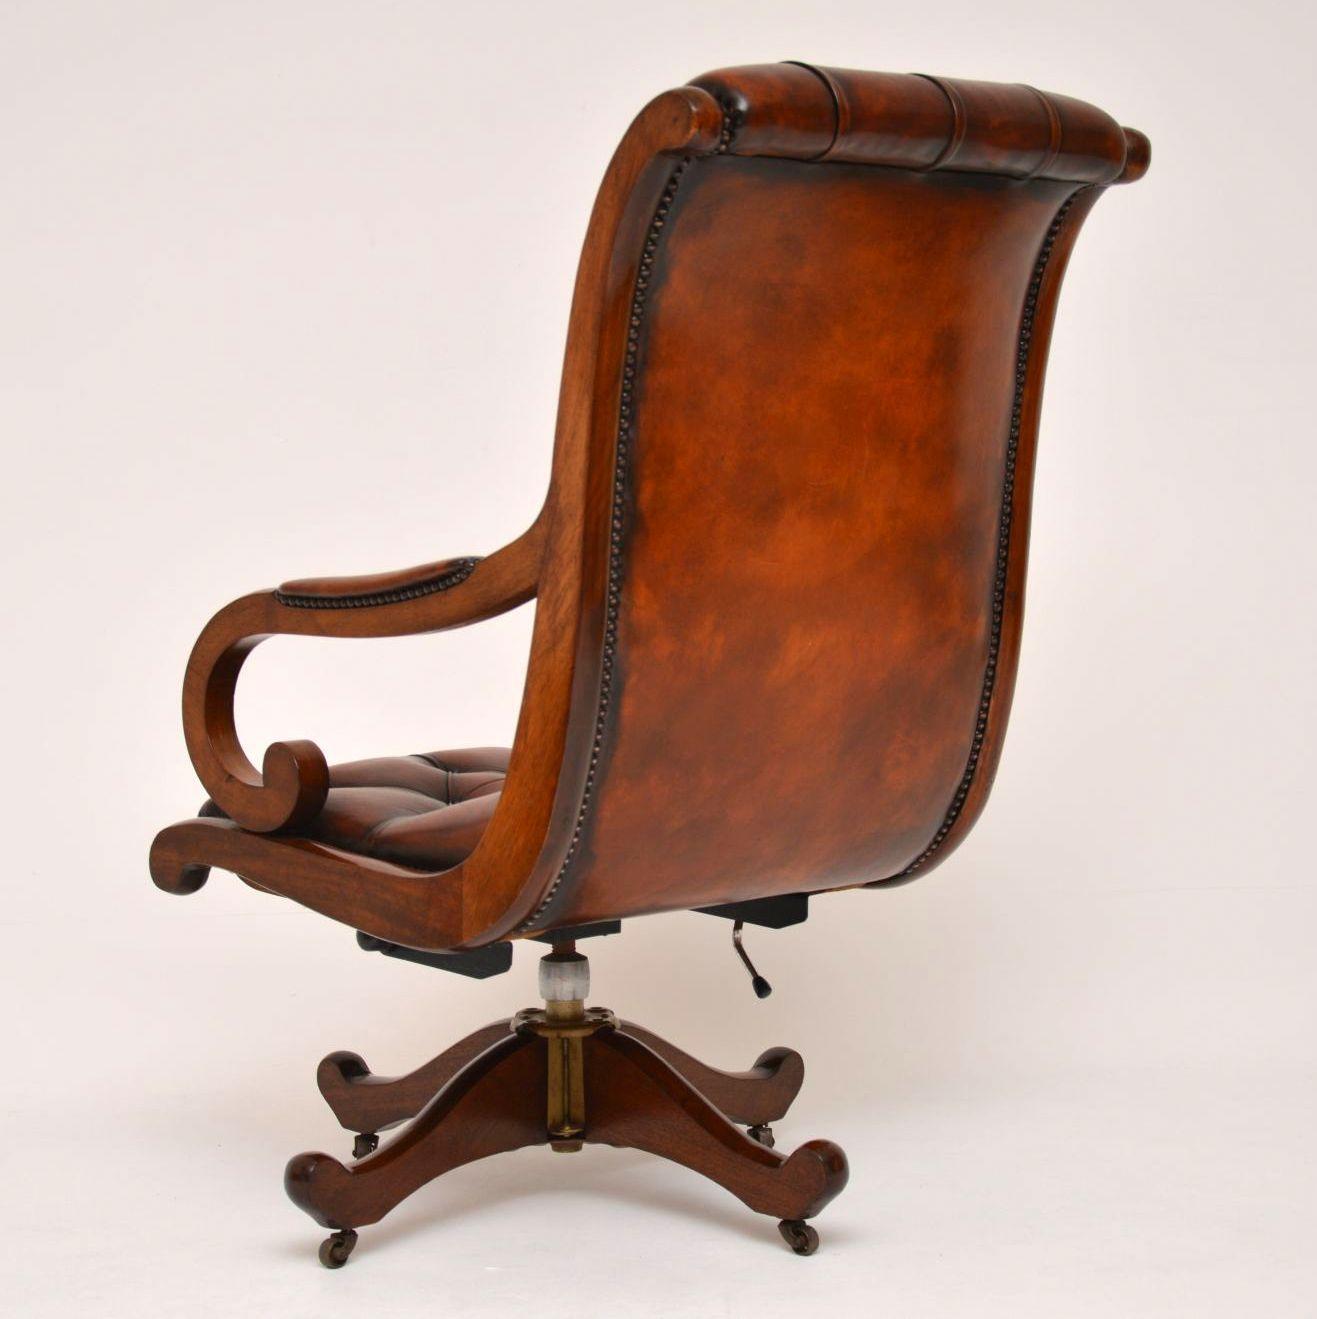 Antique Regency Style Leather and Mahogany Swivel Desk Chair 1